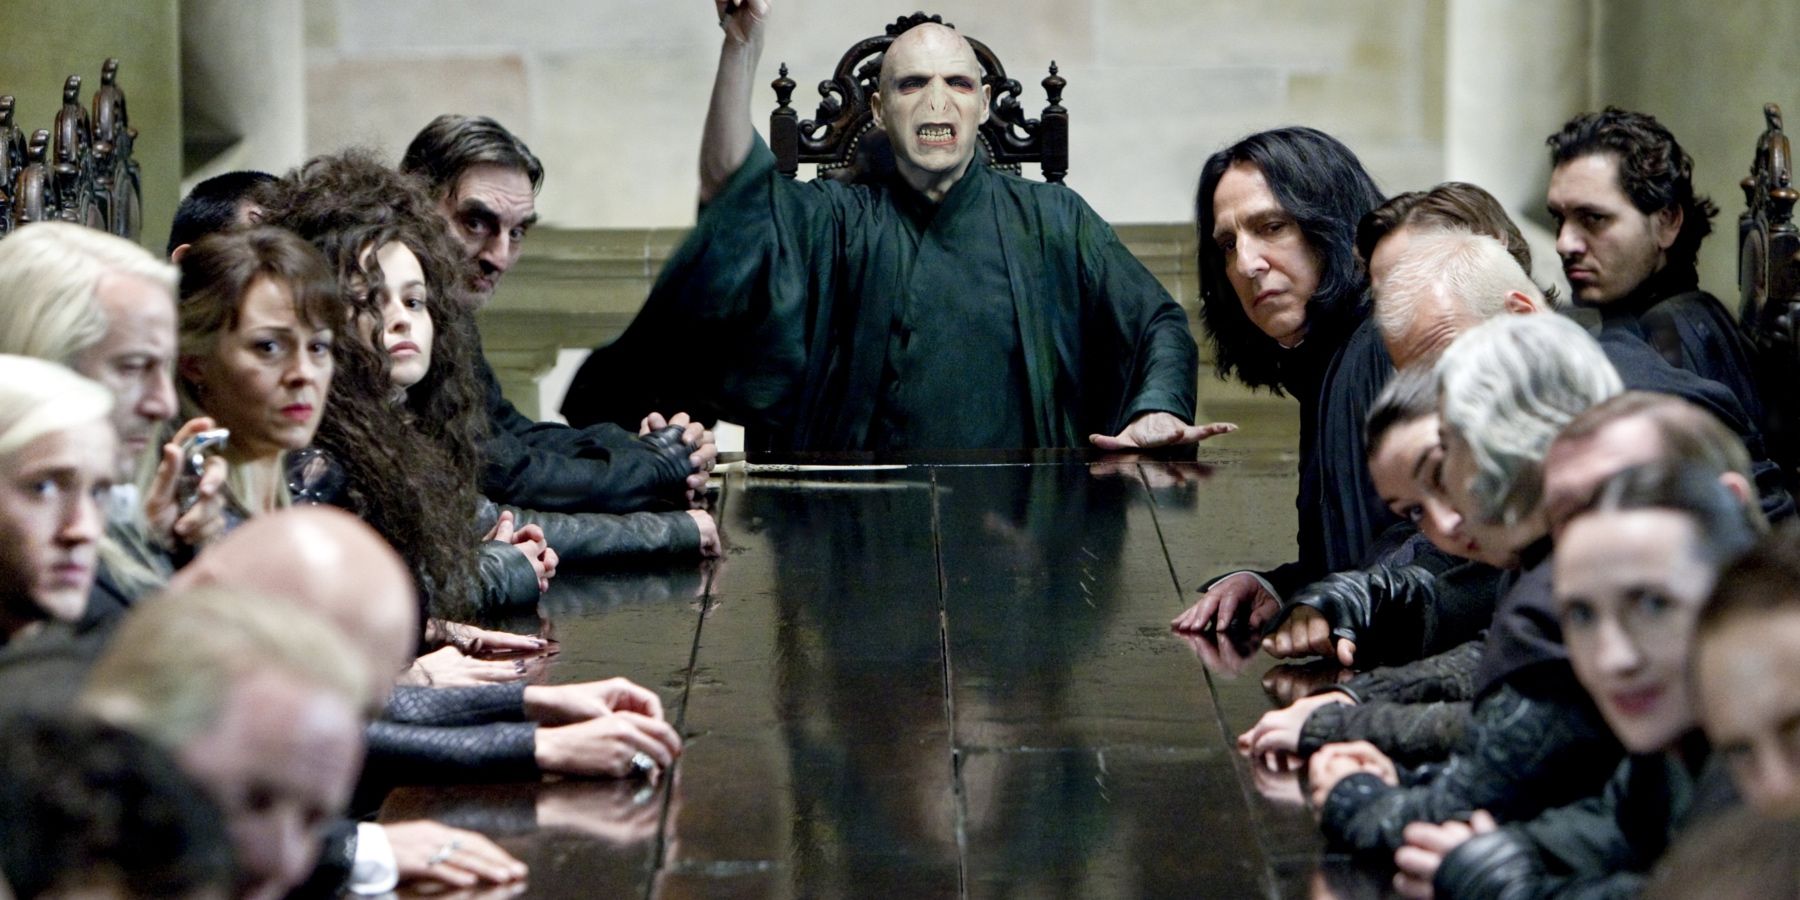 Lord-Voldemort-and-his-army